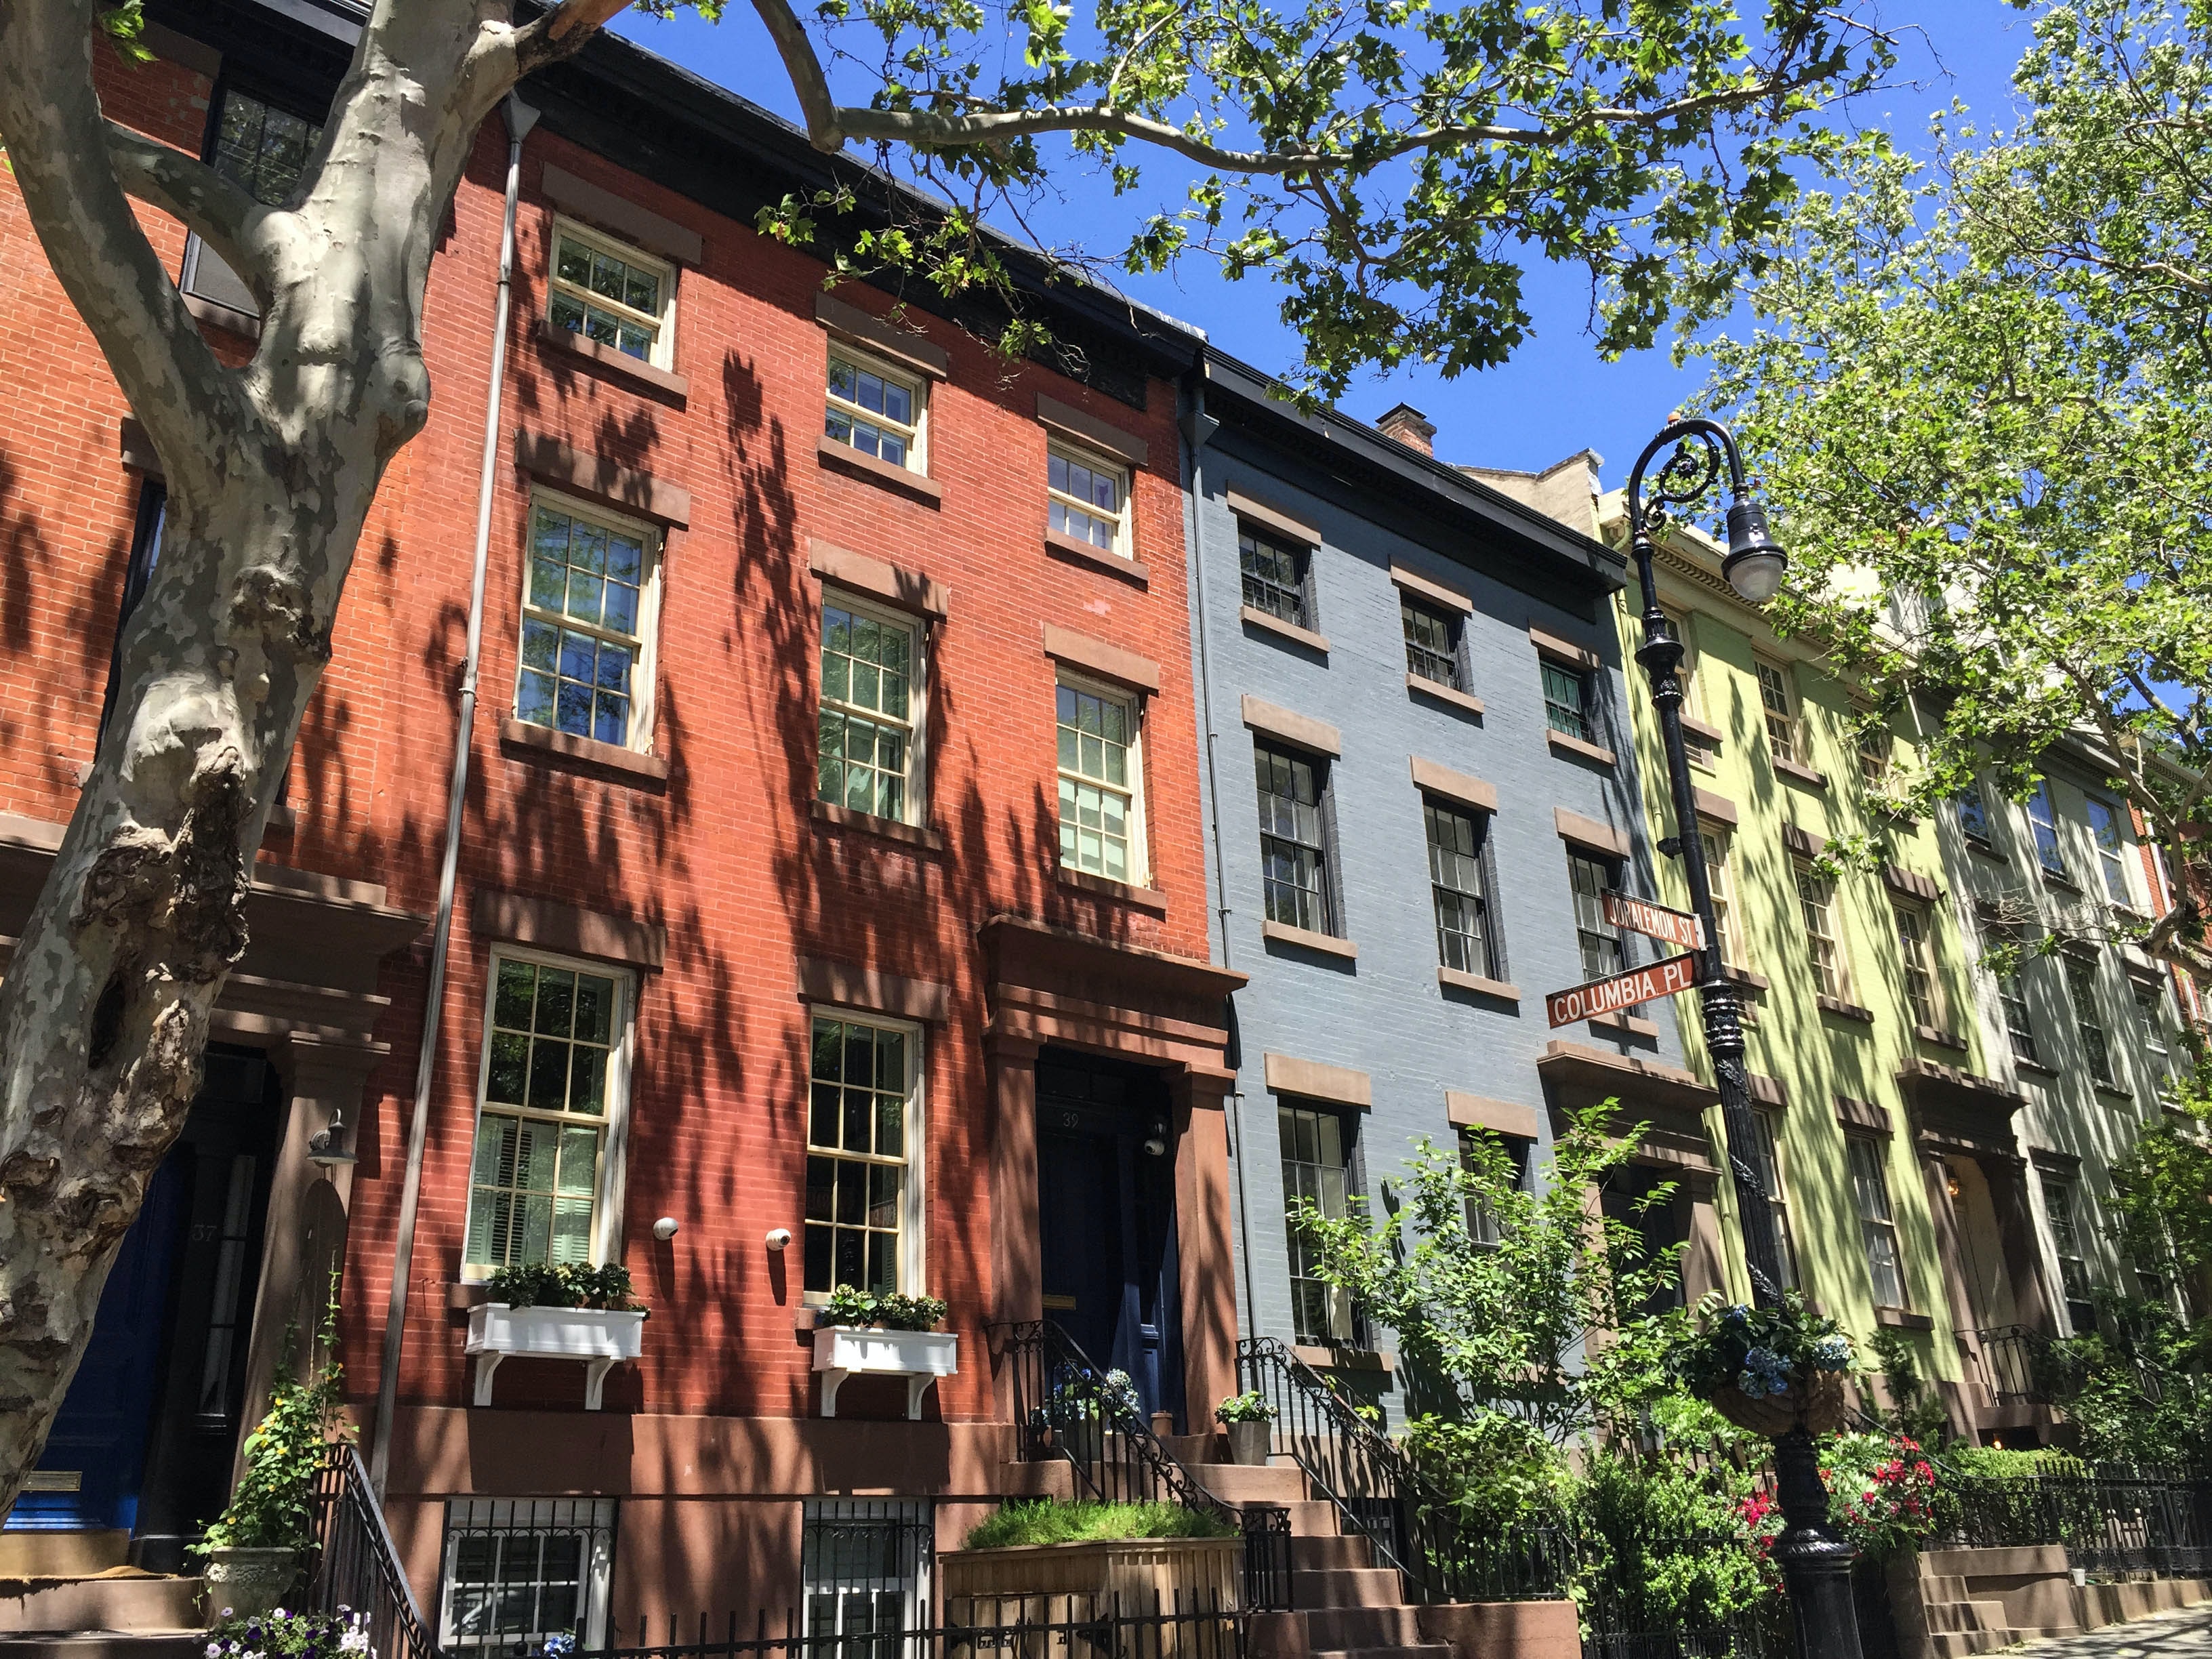 A (Surprisingly Sordid) Literary Tour of Brooklyn Heights - Tawk of New Yawk